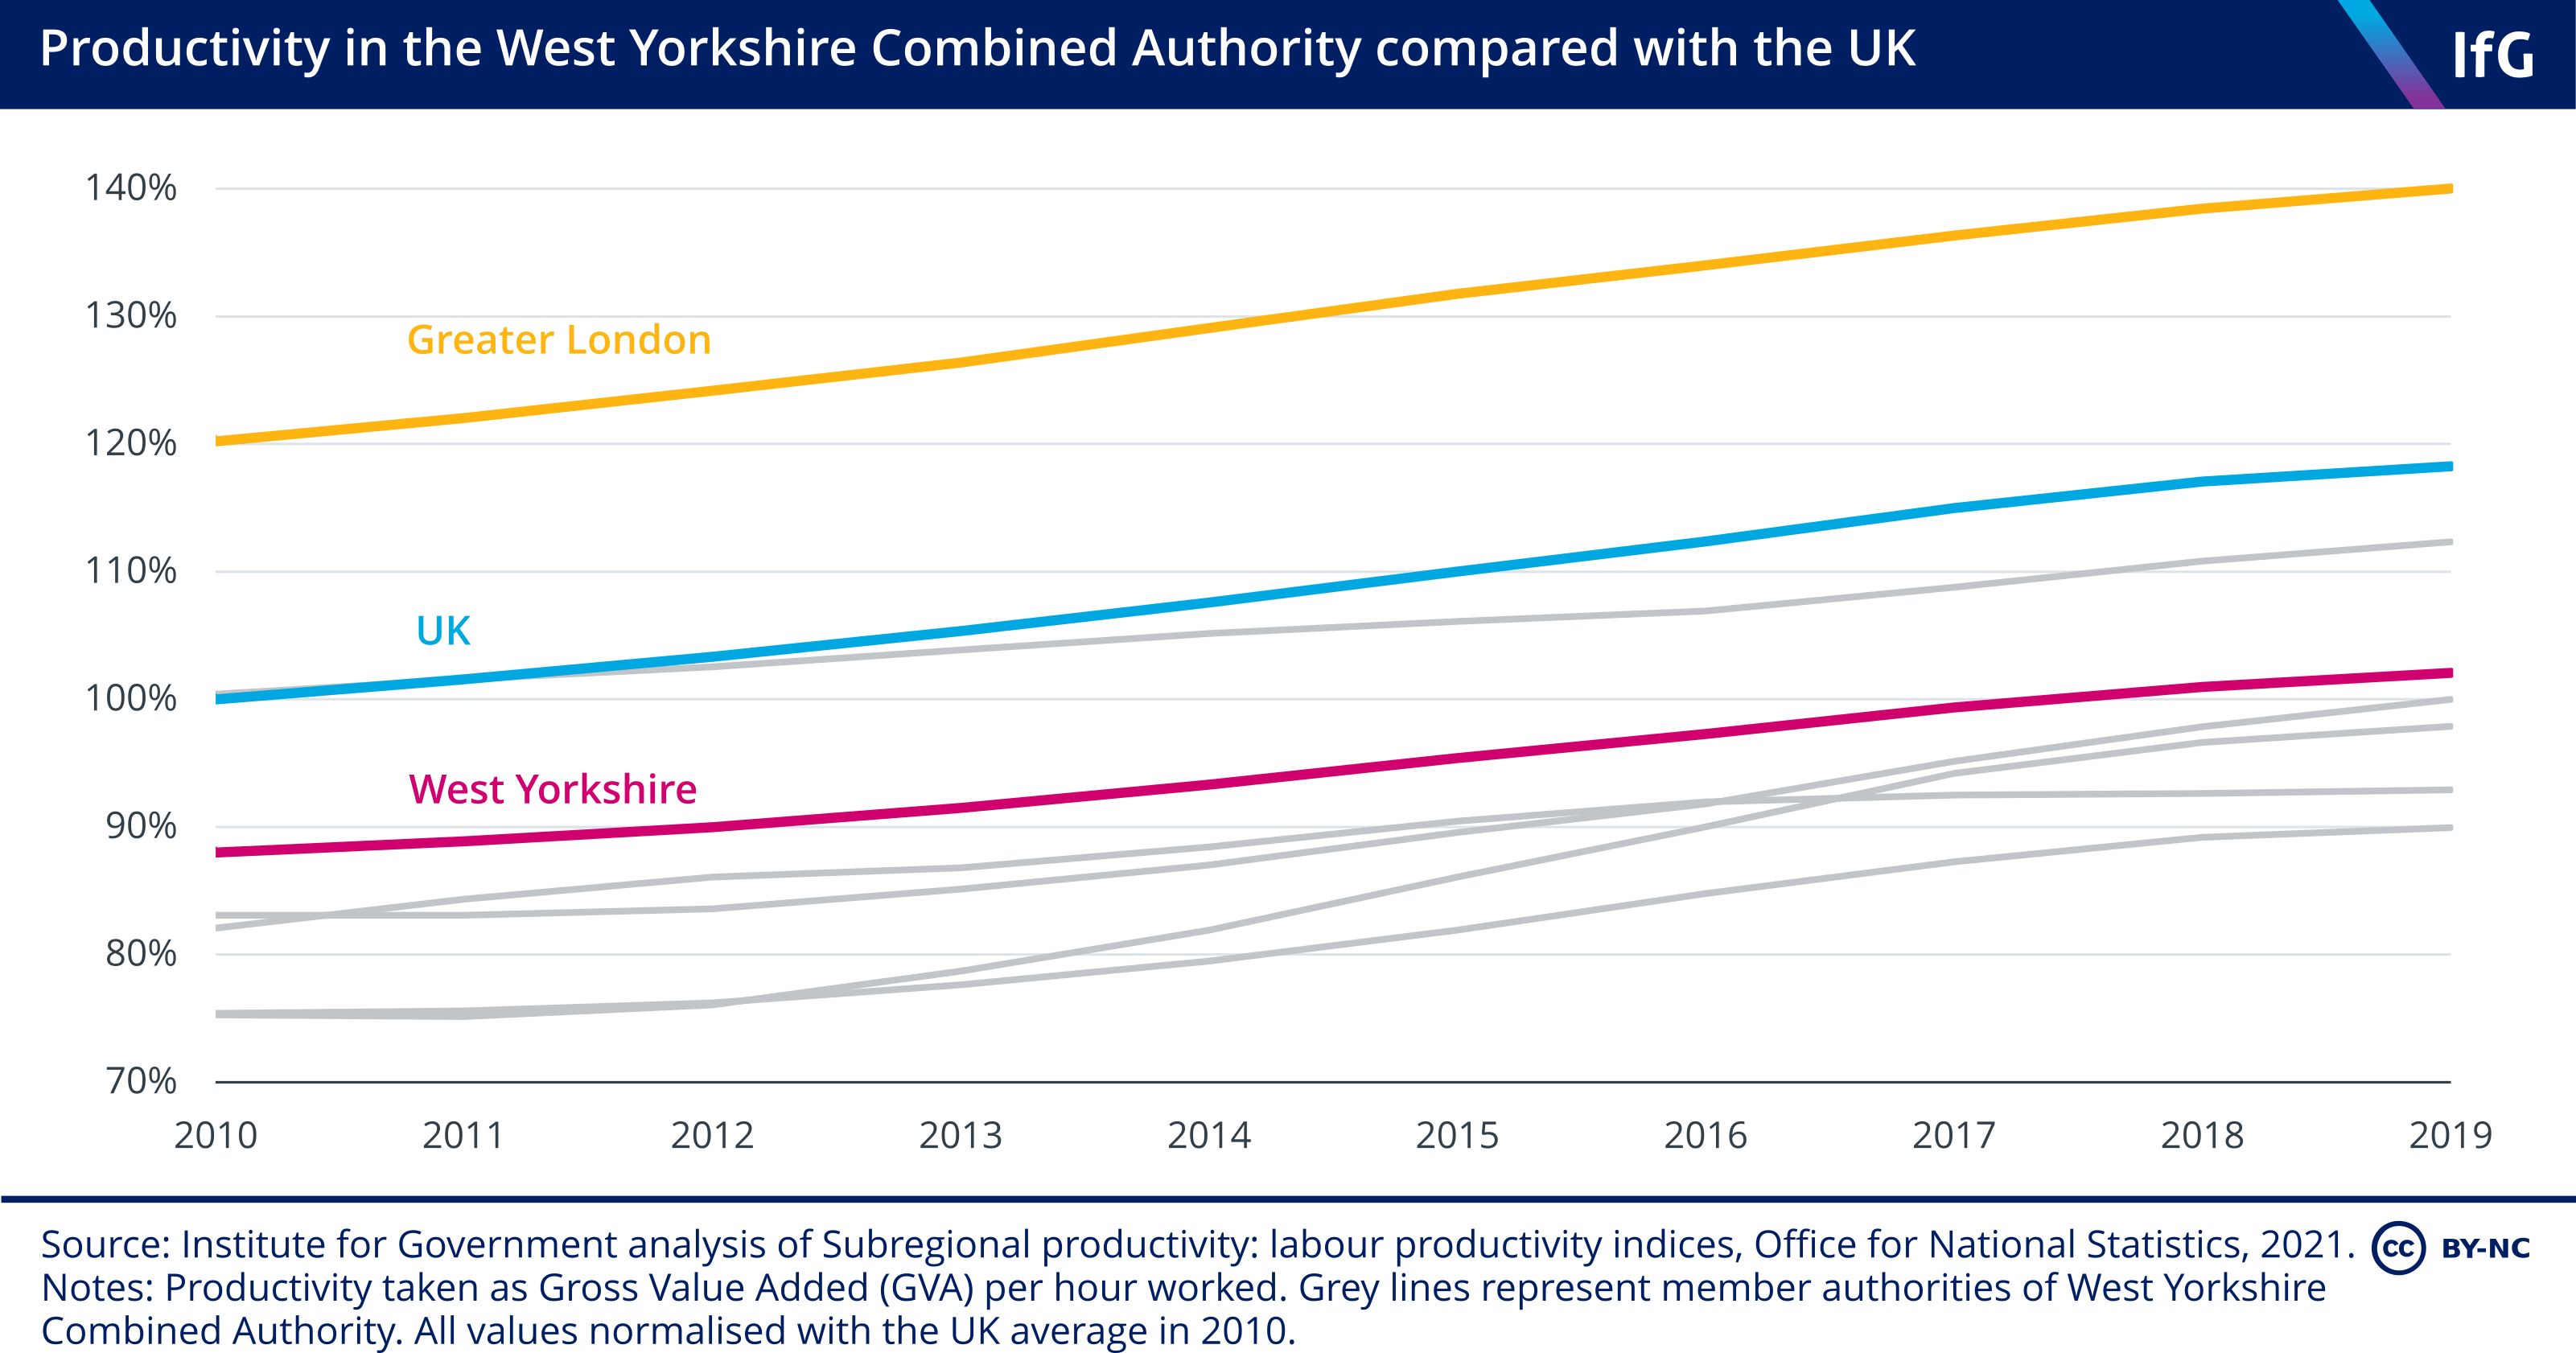 Productivity in the West Yorkshire Combined Authority compared with the UK